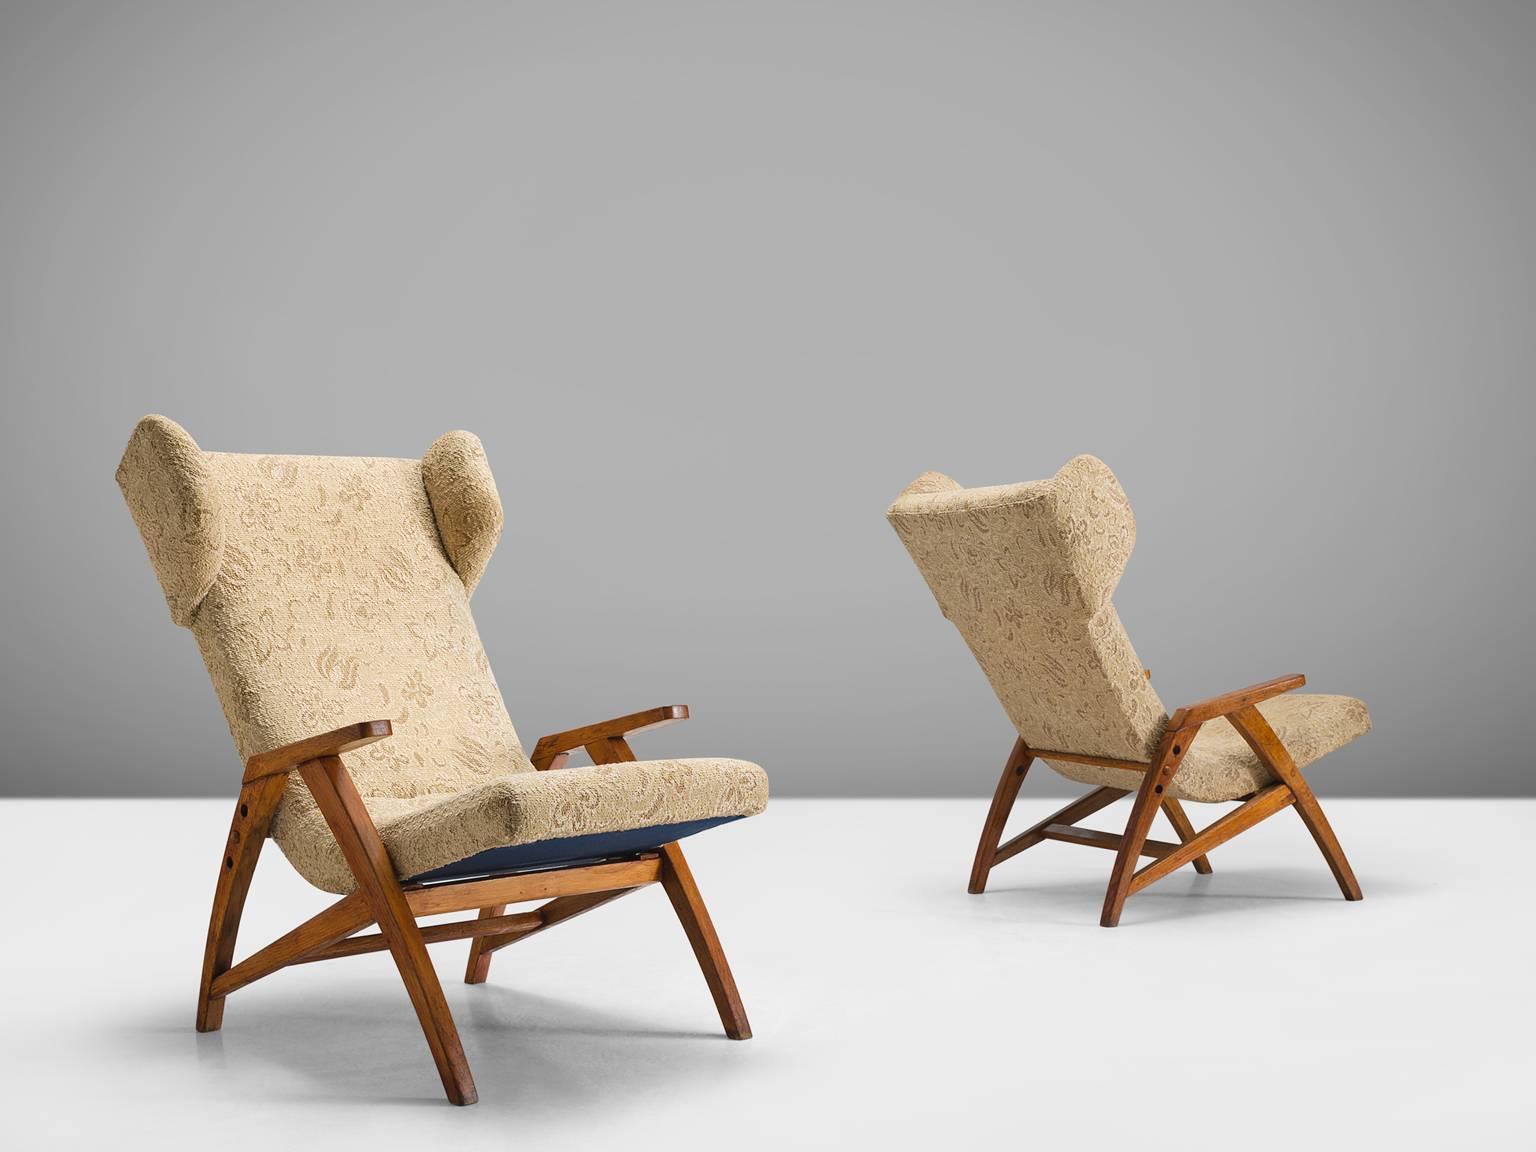 Easy chairs, wood, beige brown fabric, oak, Czech Republic, 1940s.

Two strong oak wingback chairs designed with a slightly sloped back in order to provide sitting comfort. The chair features small, geometric wings that are separated from the the